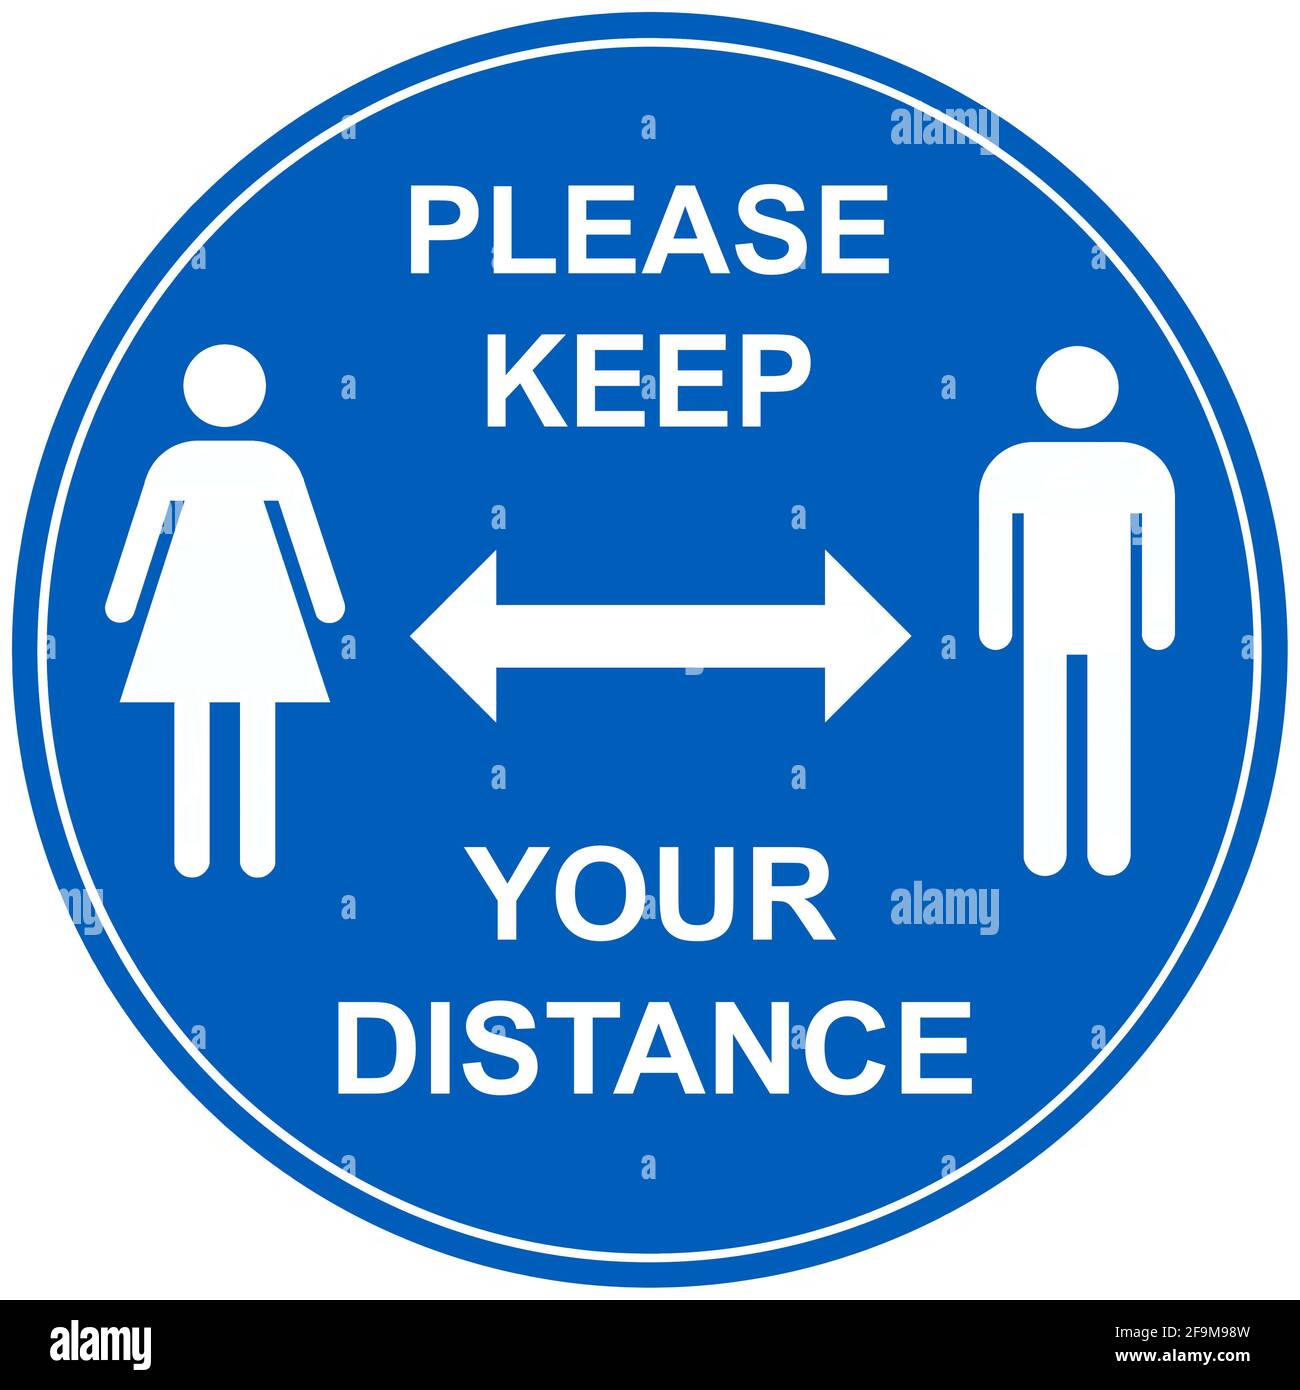 Please keep your distance to stay safe sign Stock Photo